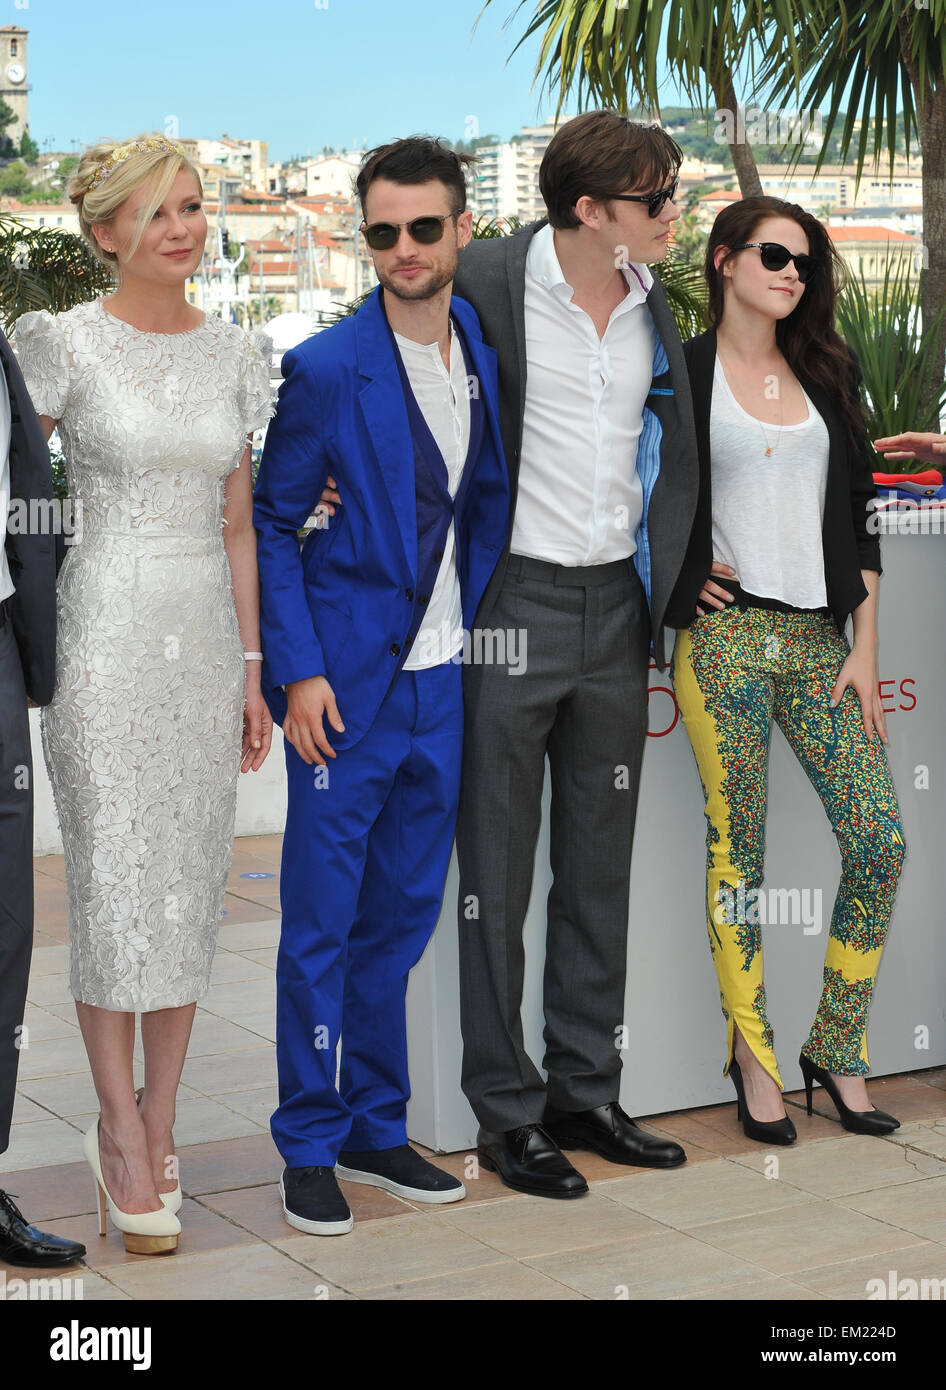 CANNES, FRANCE - MAY 23, 2012: LtoR: Kirsten Dunst, Tom Sturridge, Sam Riley & Kristen Stewart at the photocall for their new movie 'On The Road' in Cannes. May 23, 2012 Cannes, France Stock Photo